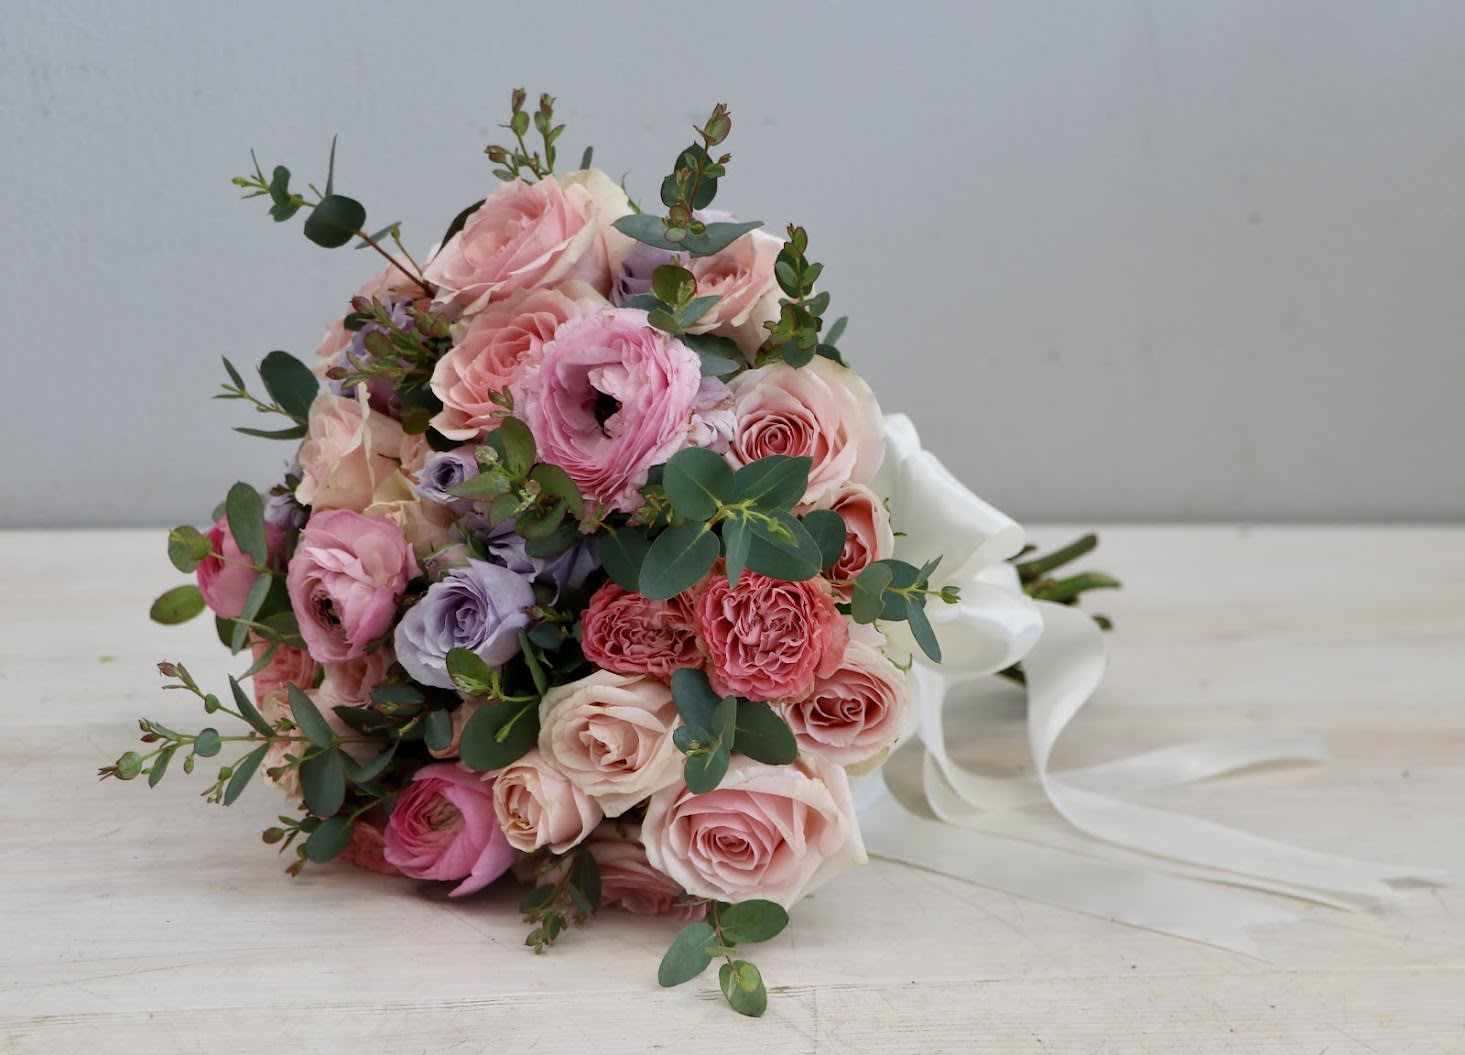 Meadows Bridal Bouquet - Boutique Collection - As the name suggests, this arrangement feels romantic and sweet. The pink roses are delicate and sweet, and the lavender and greenery add a touch of fragrant romance. FOR EVENTS DELIVERY: 7.5% OF EVENT SUBTOTAL DELIVERY + SETUP: 15% OF EVENT SUBTOTAL